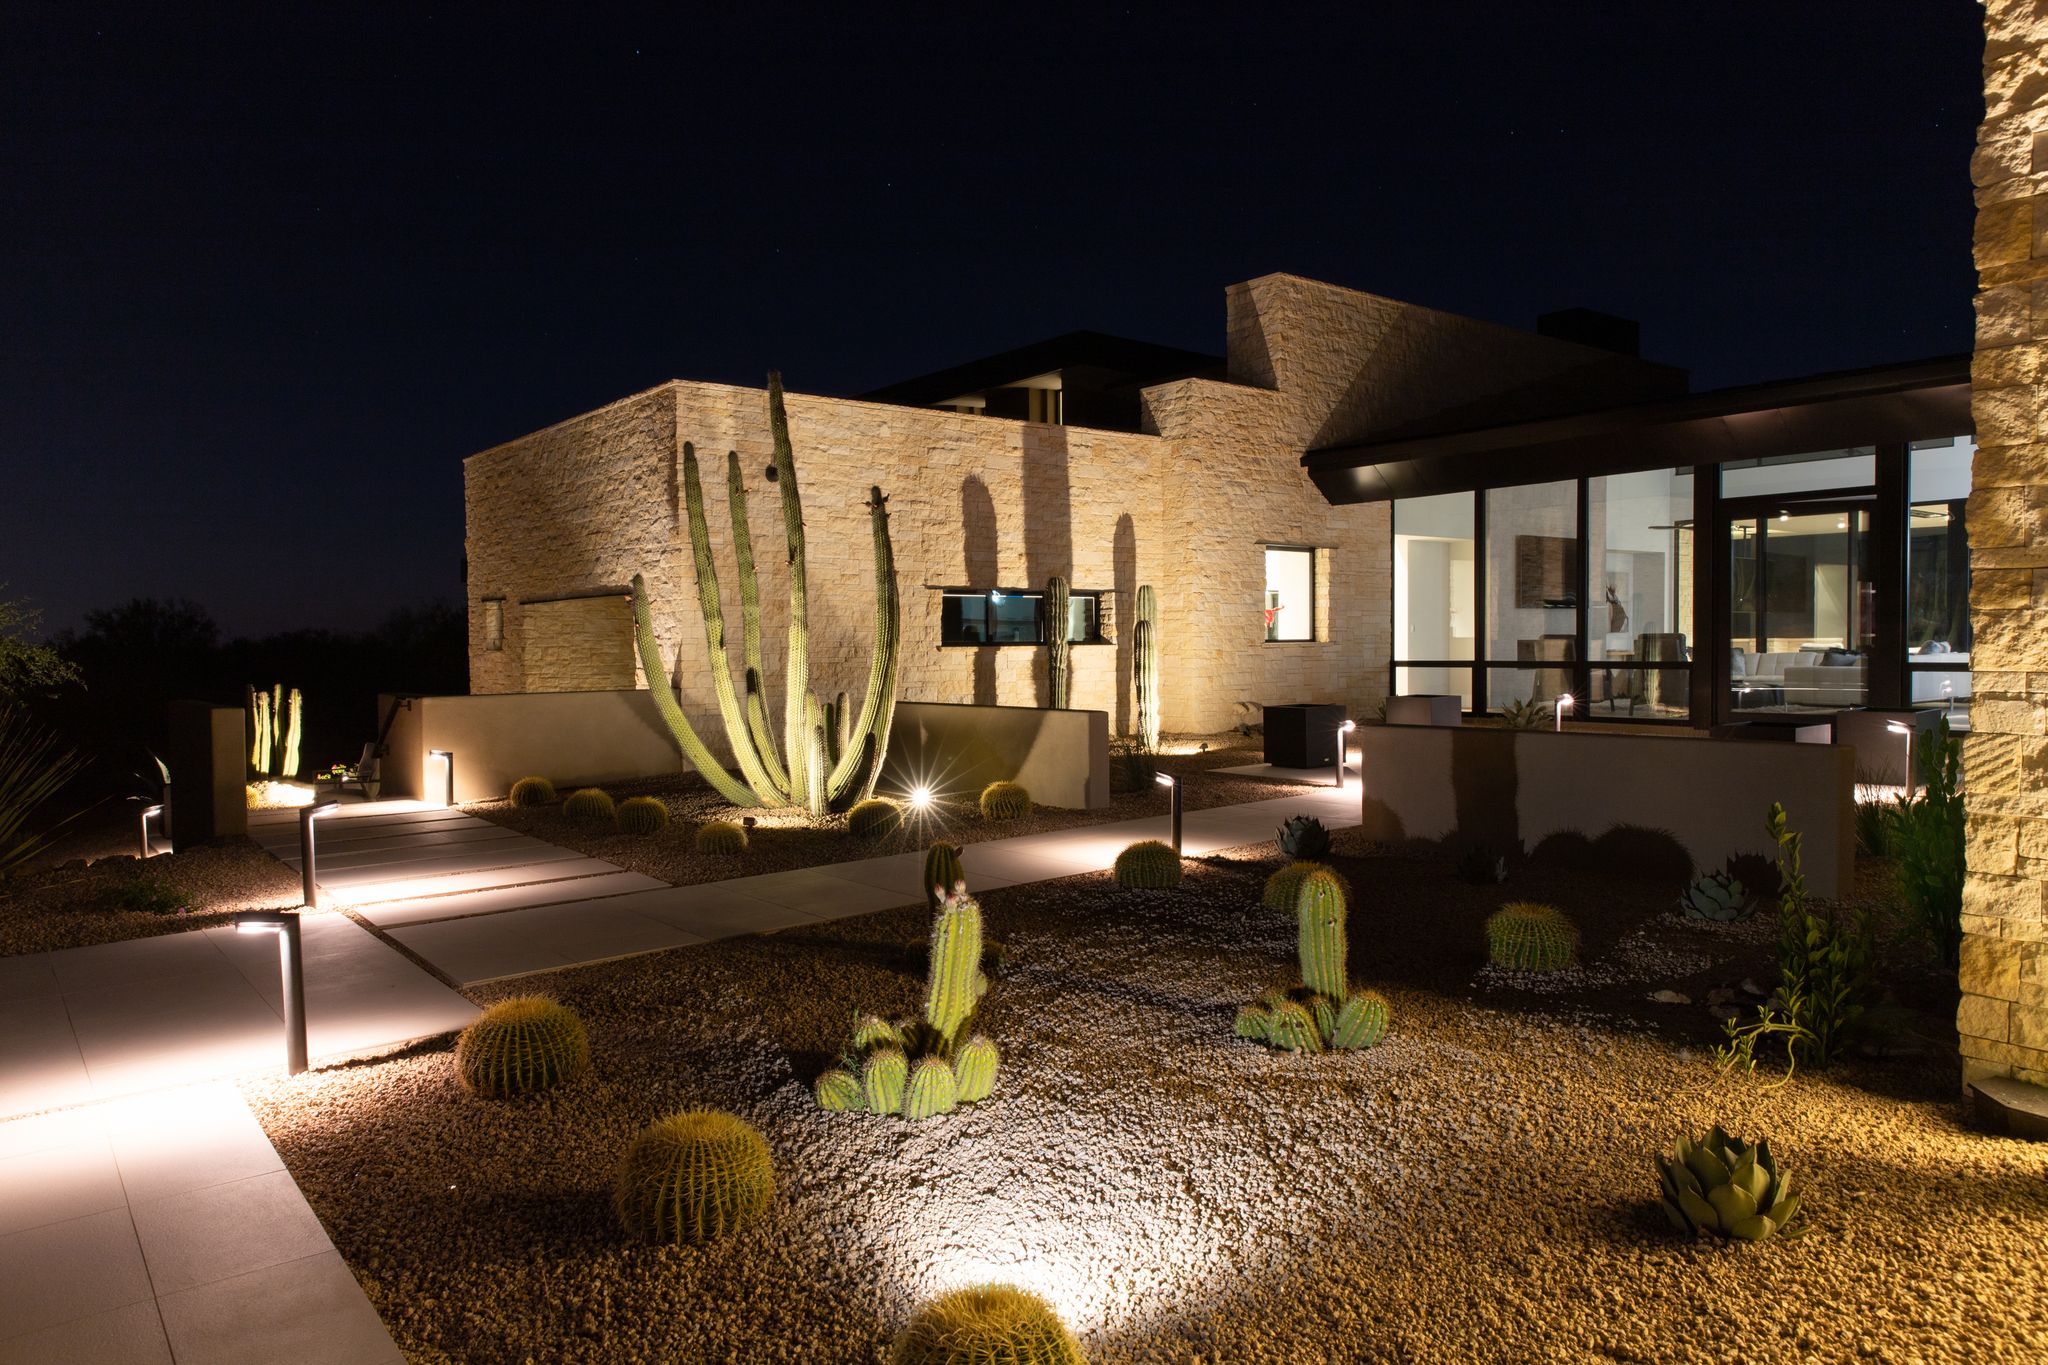 Five Desert Landscaping Ideas That We Recommend If You Live In A Desert Region